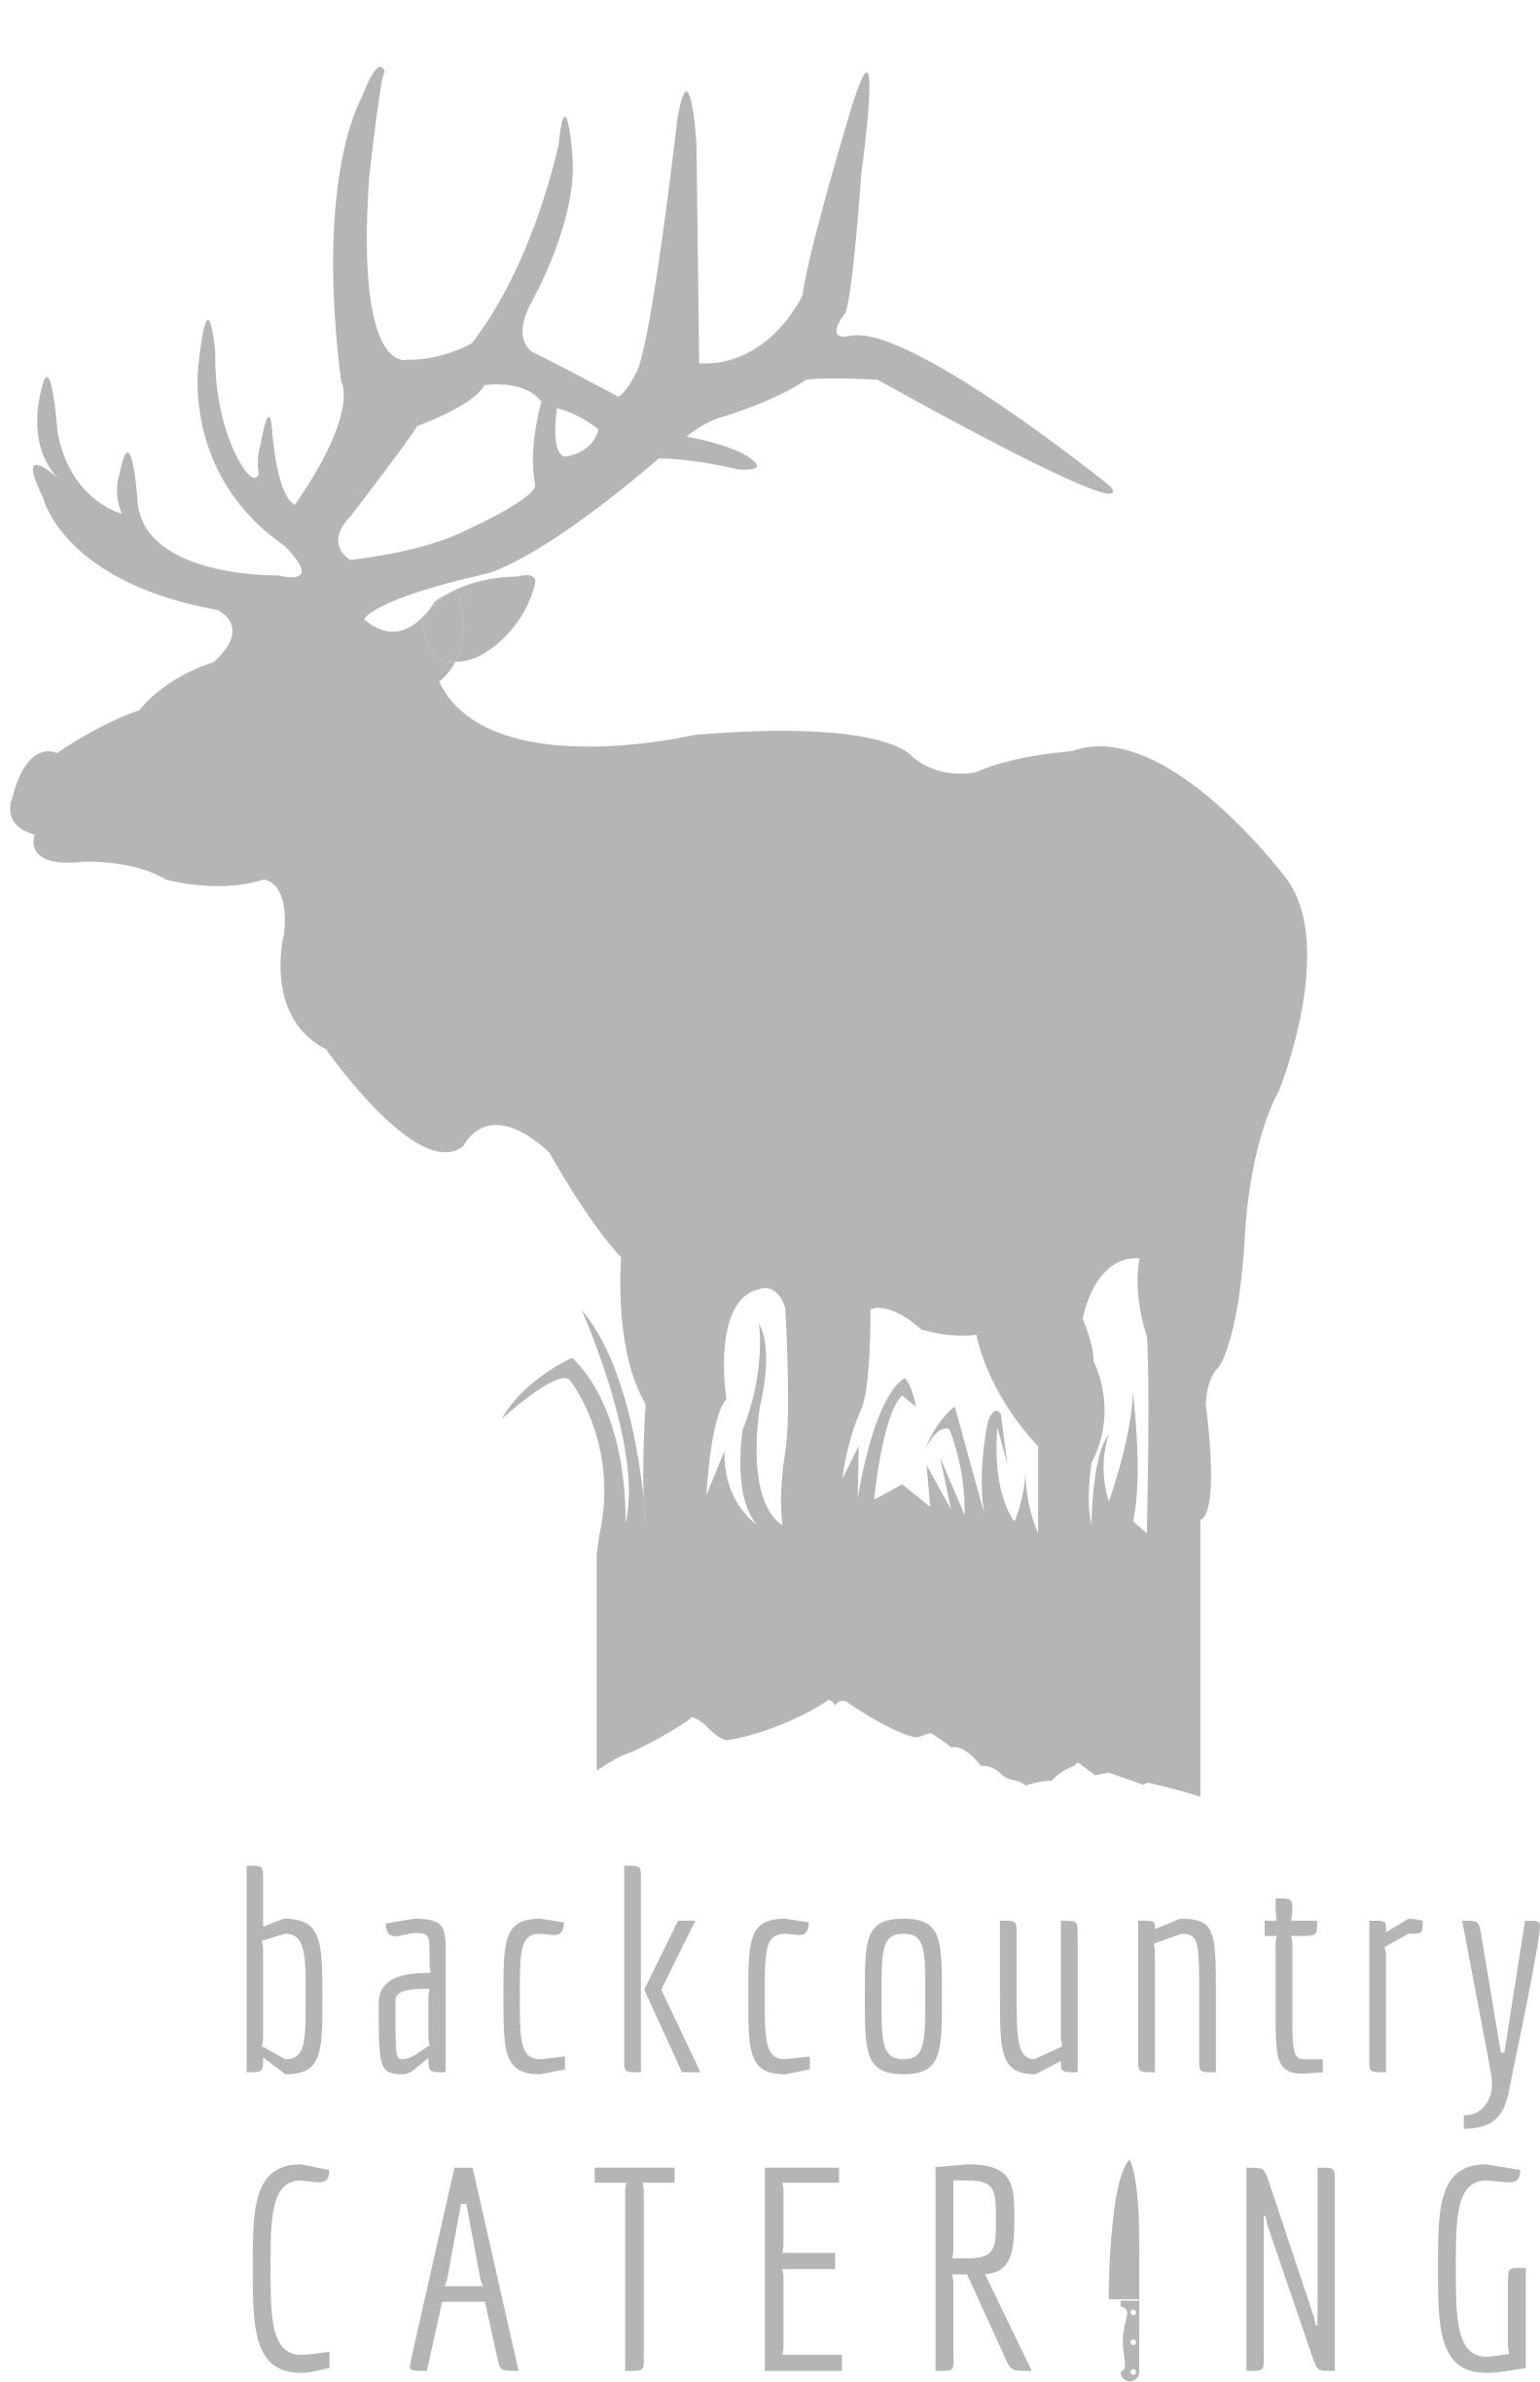 Backcountry Catering